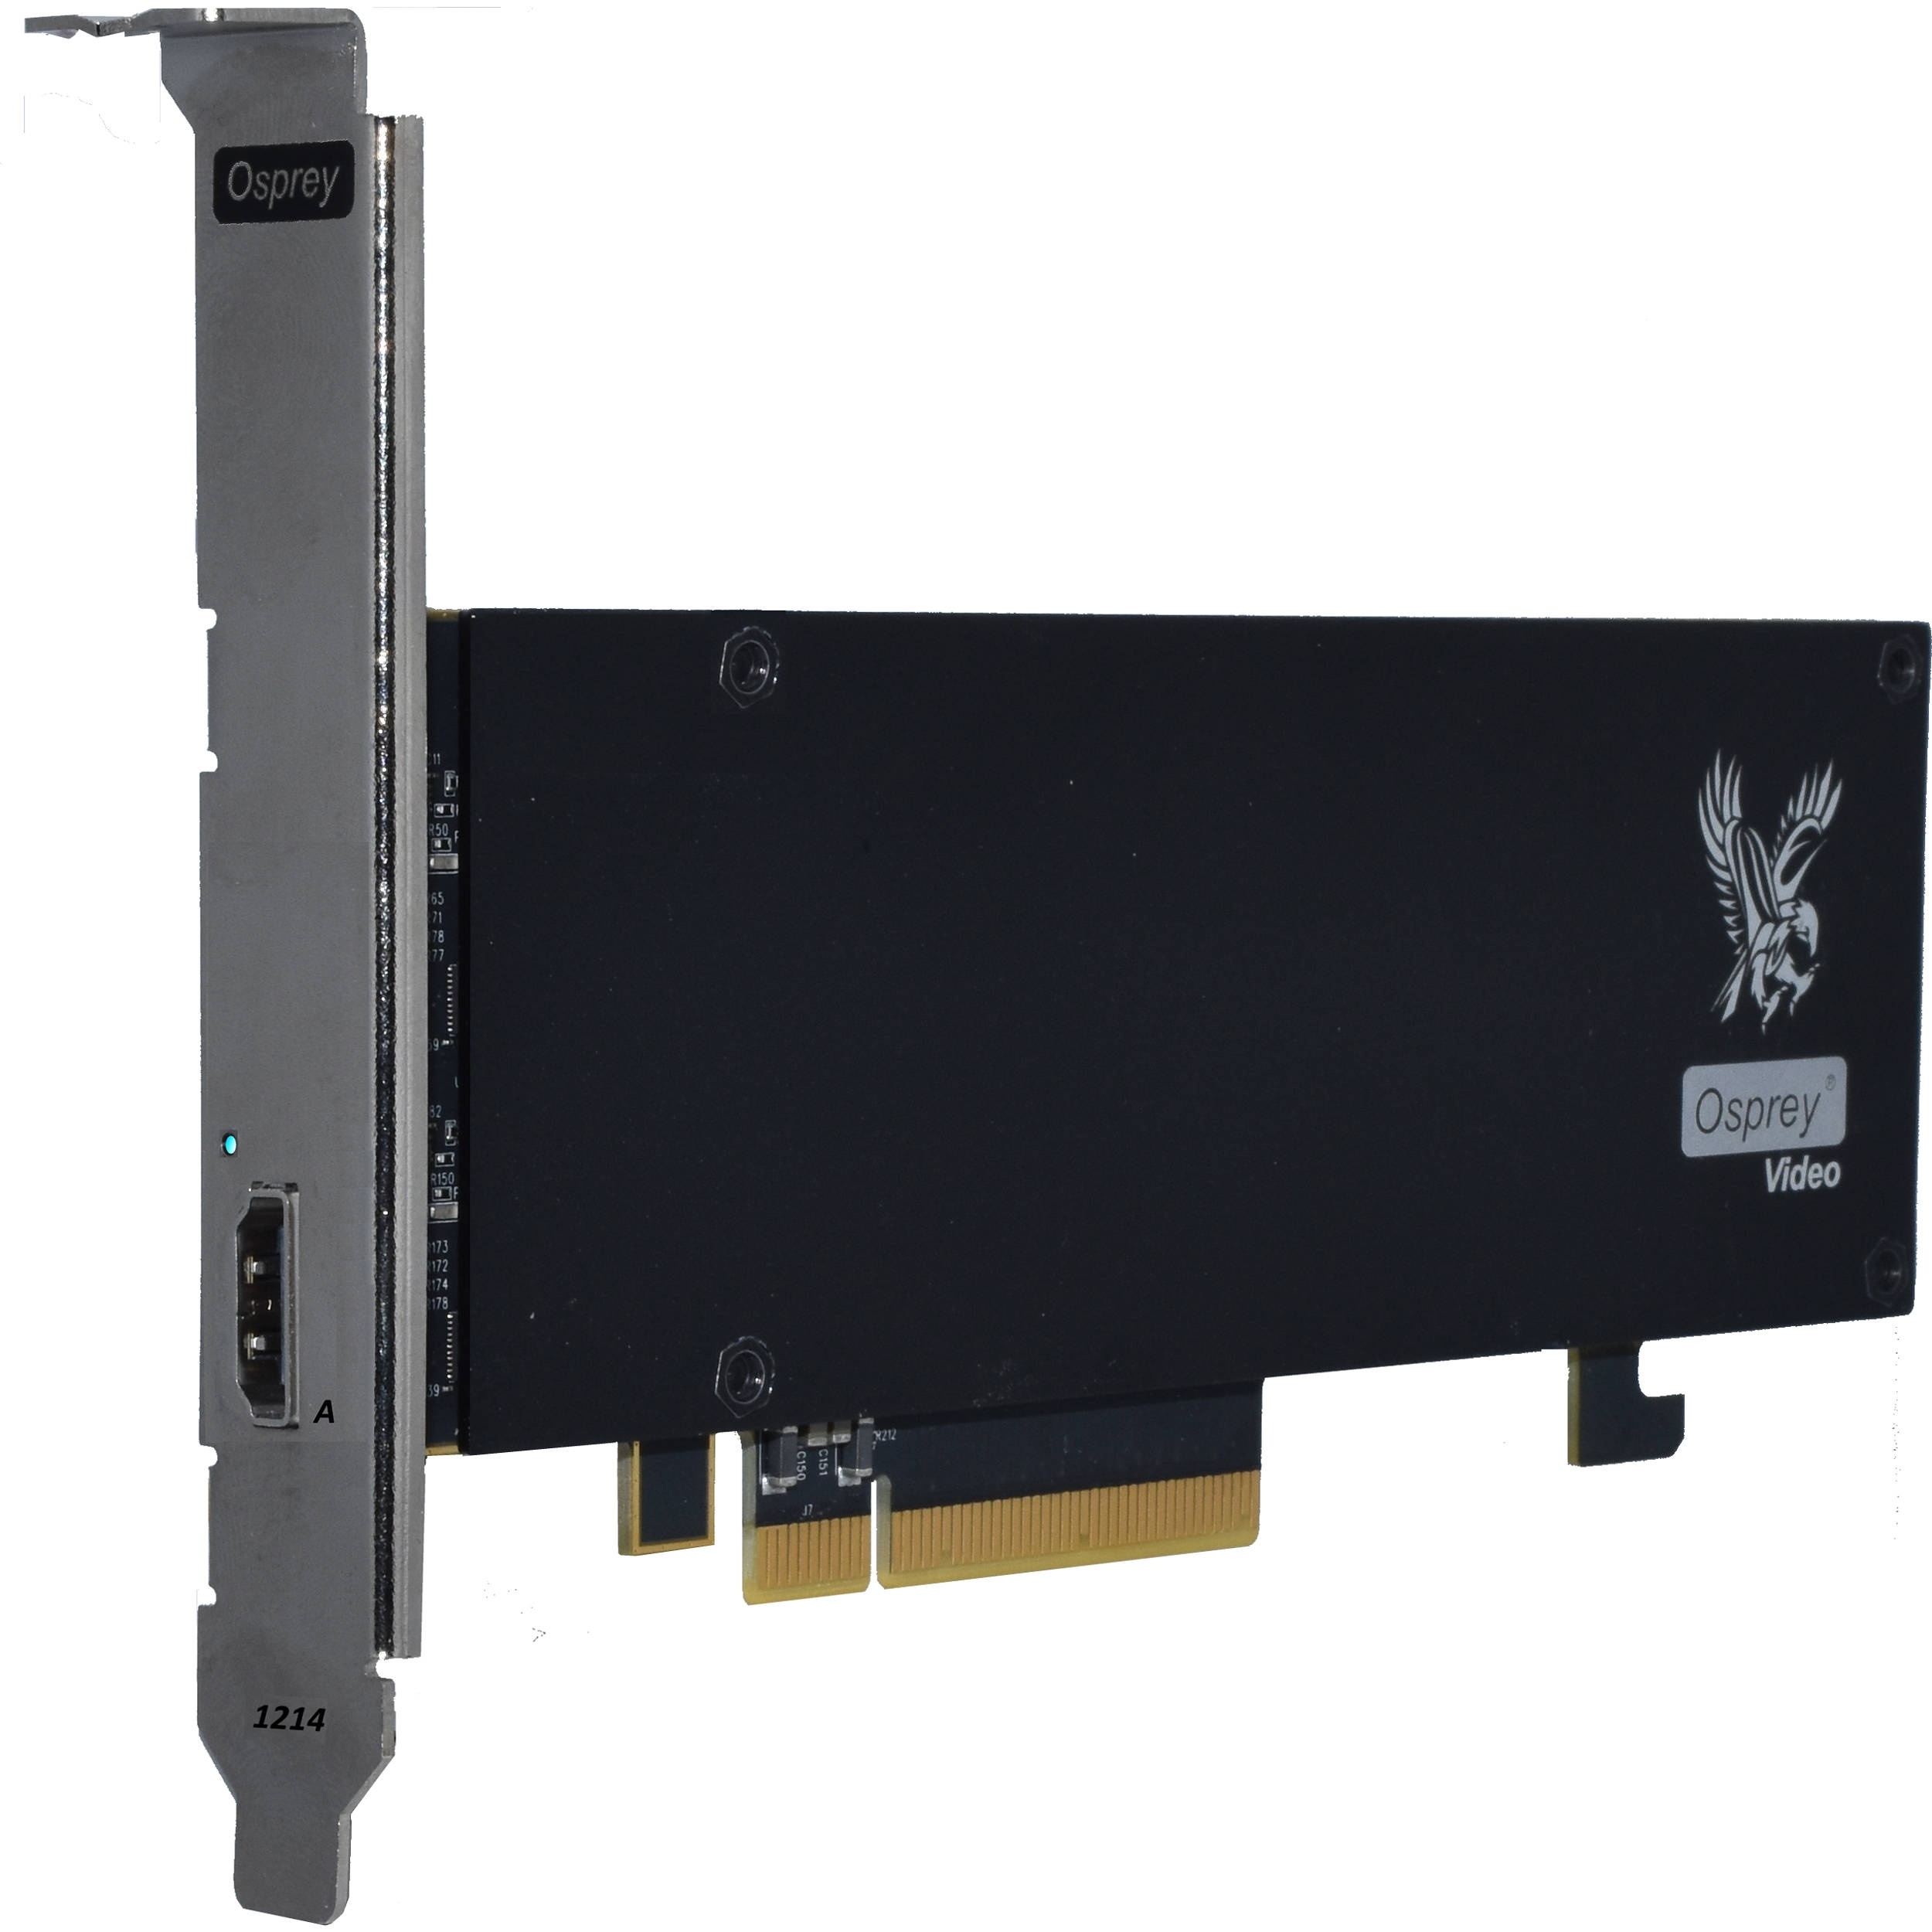 Osprey 1214 PCIe Capture Card with HDMI 2.0 4K60